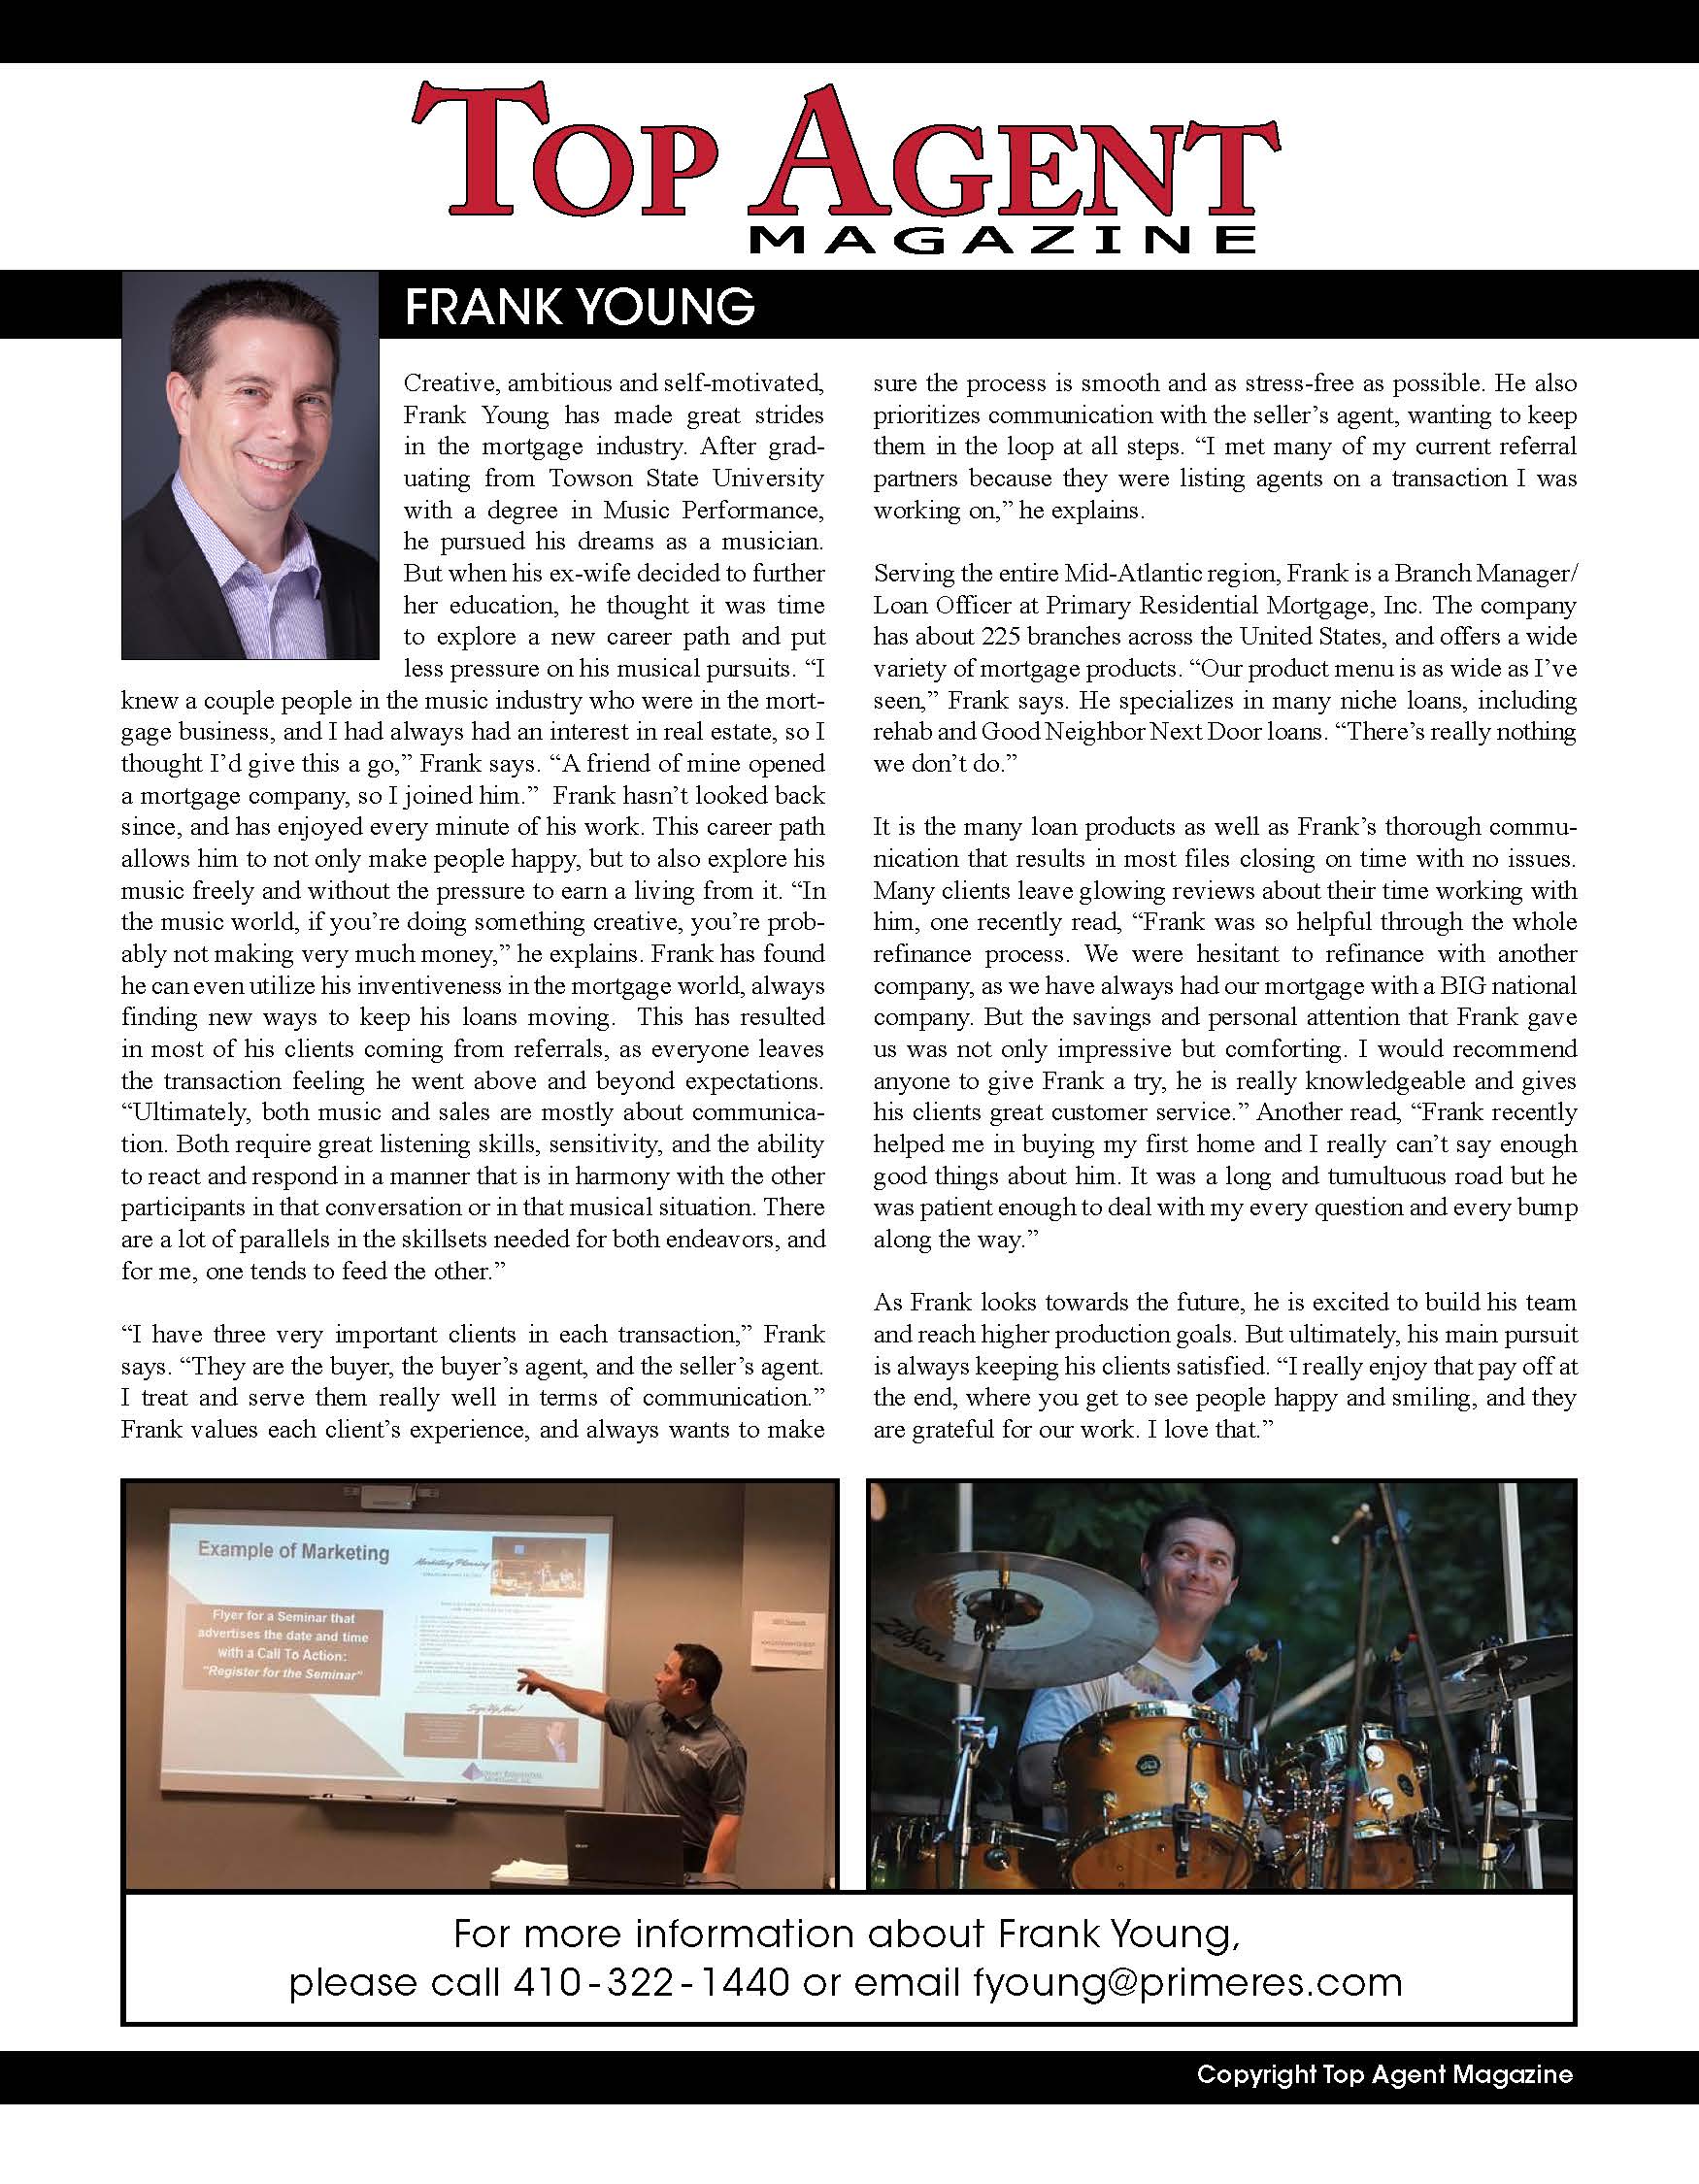 FRANK-YOUNG Top Agent Magazine Article